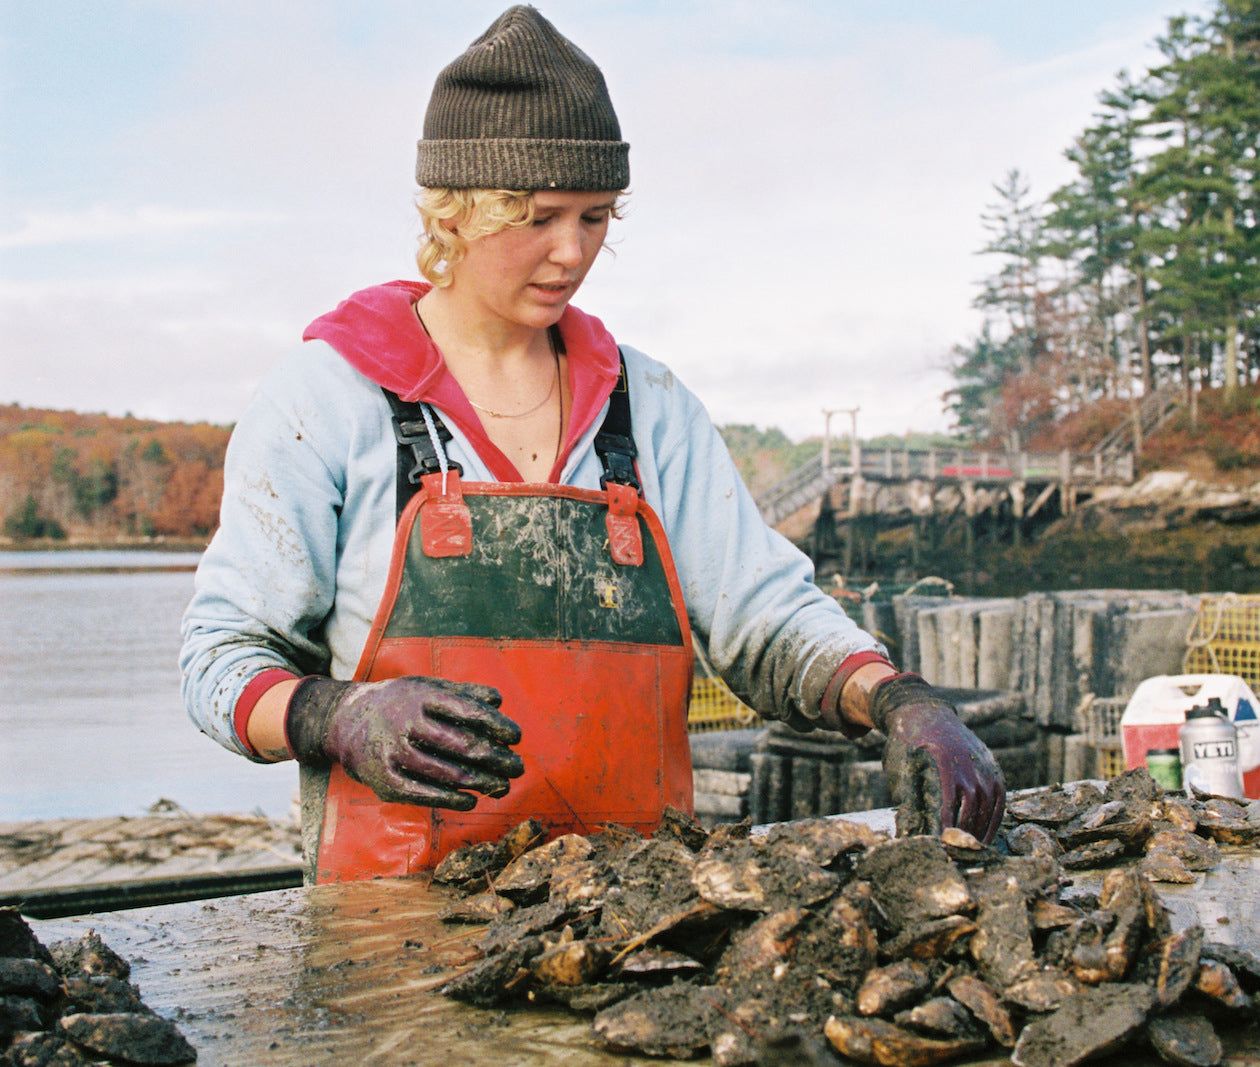 Blackstone Point Oysters from Damariscotta, ME